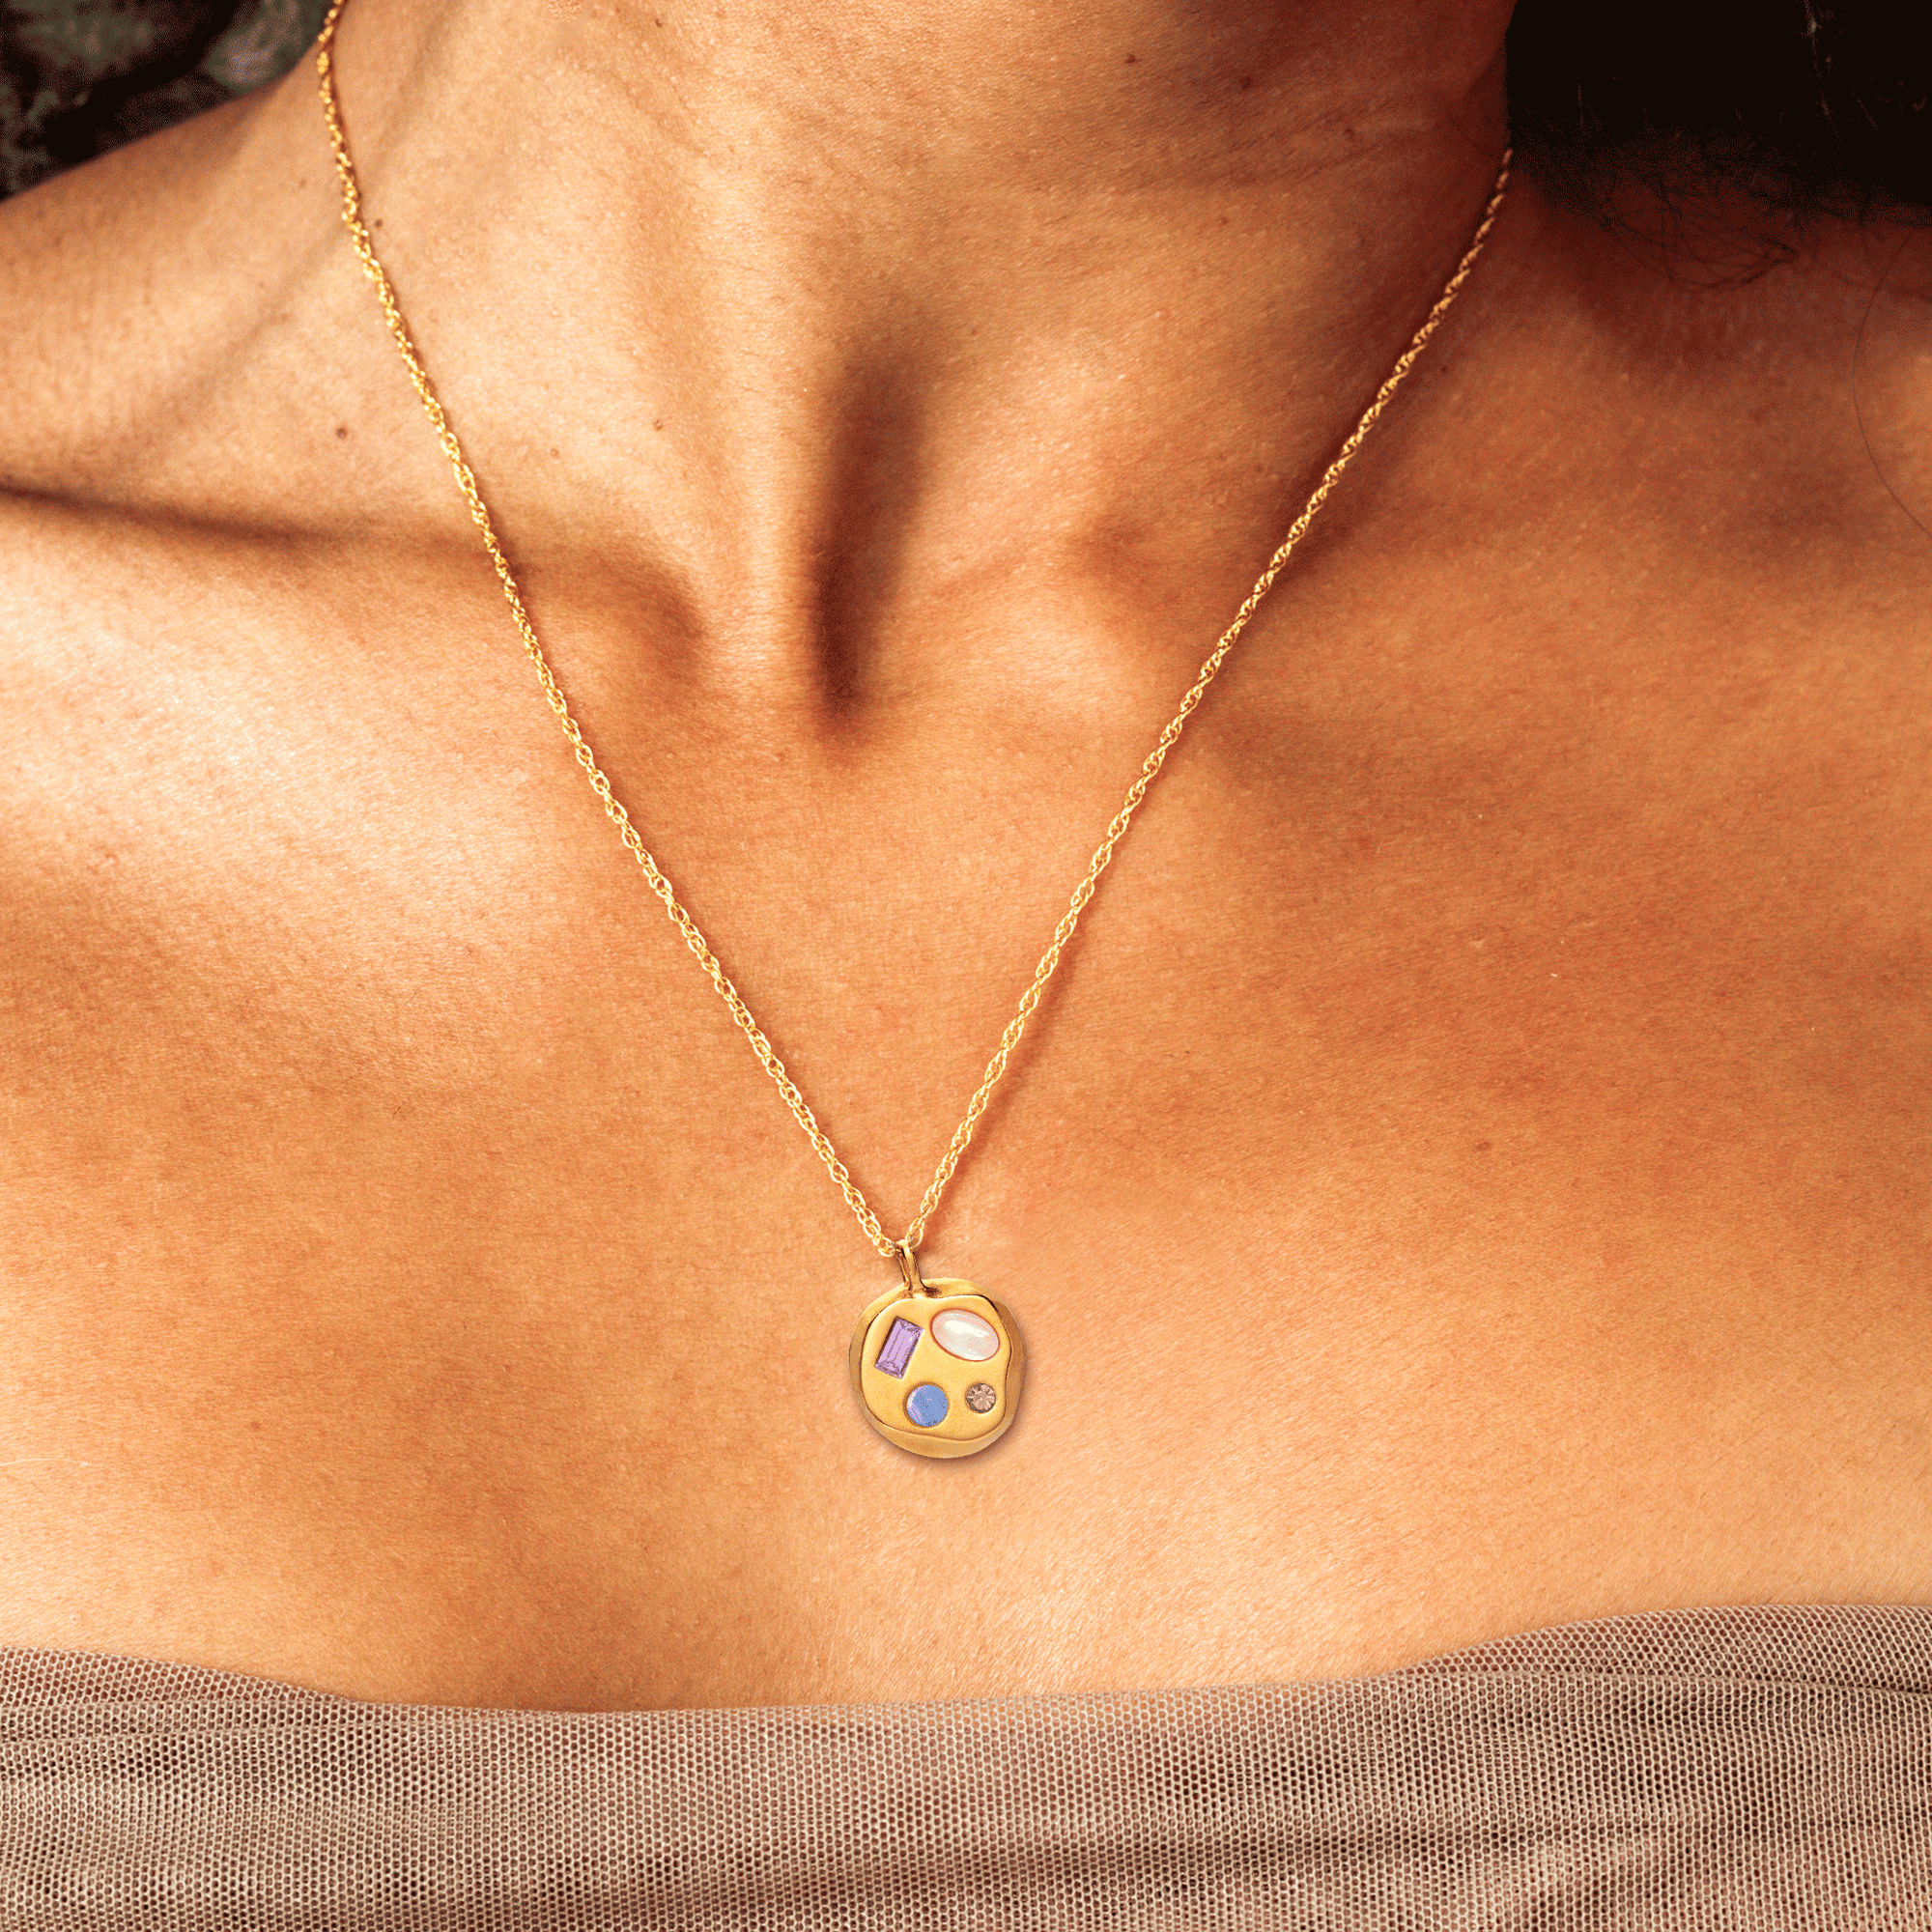 Person wearing The February Ninth Pendant